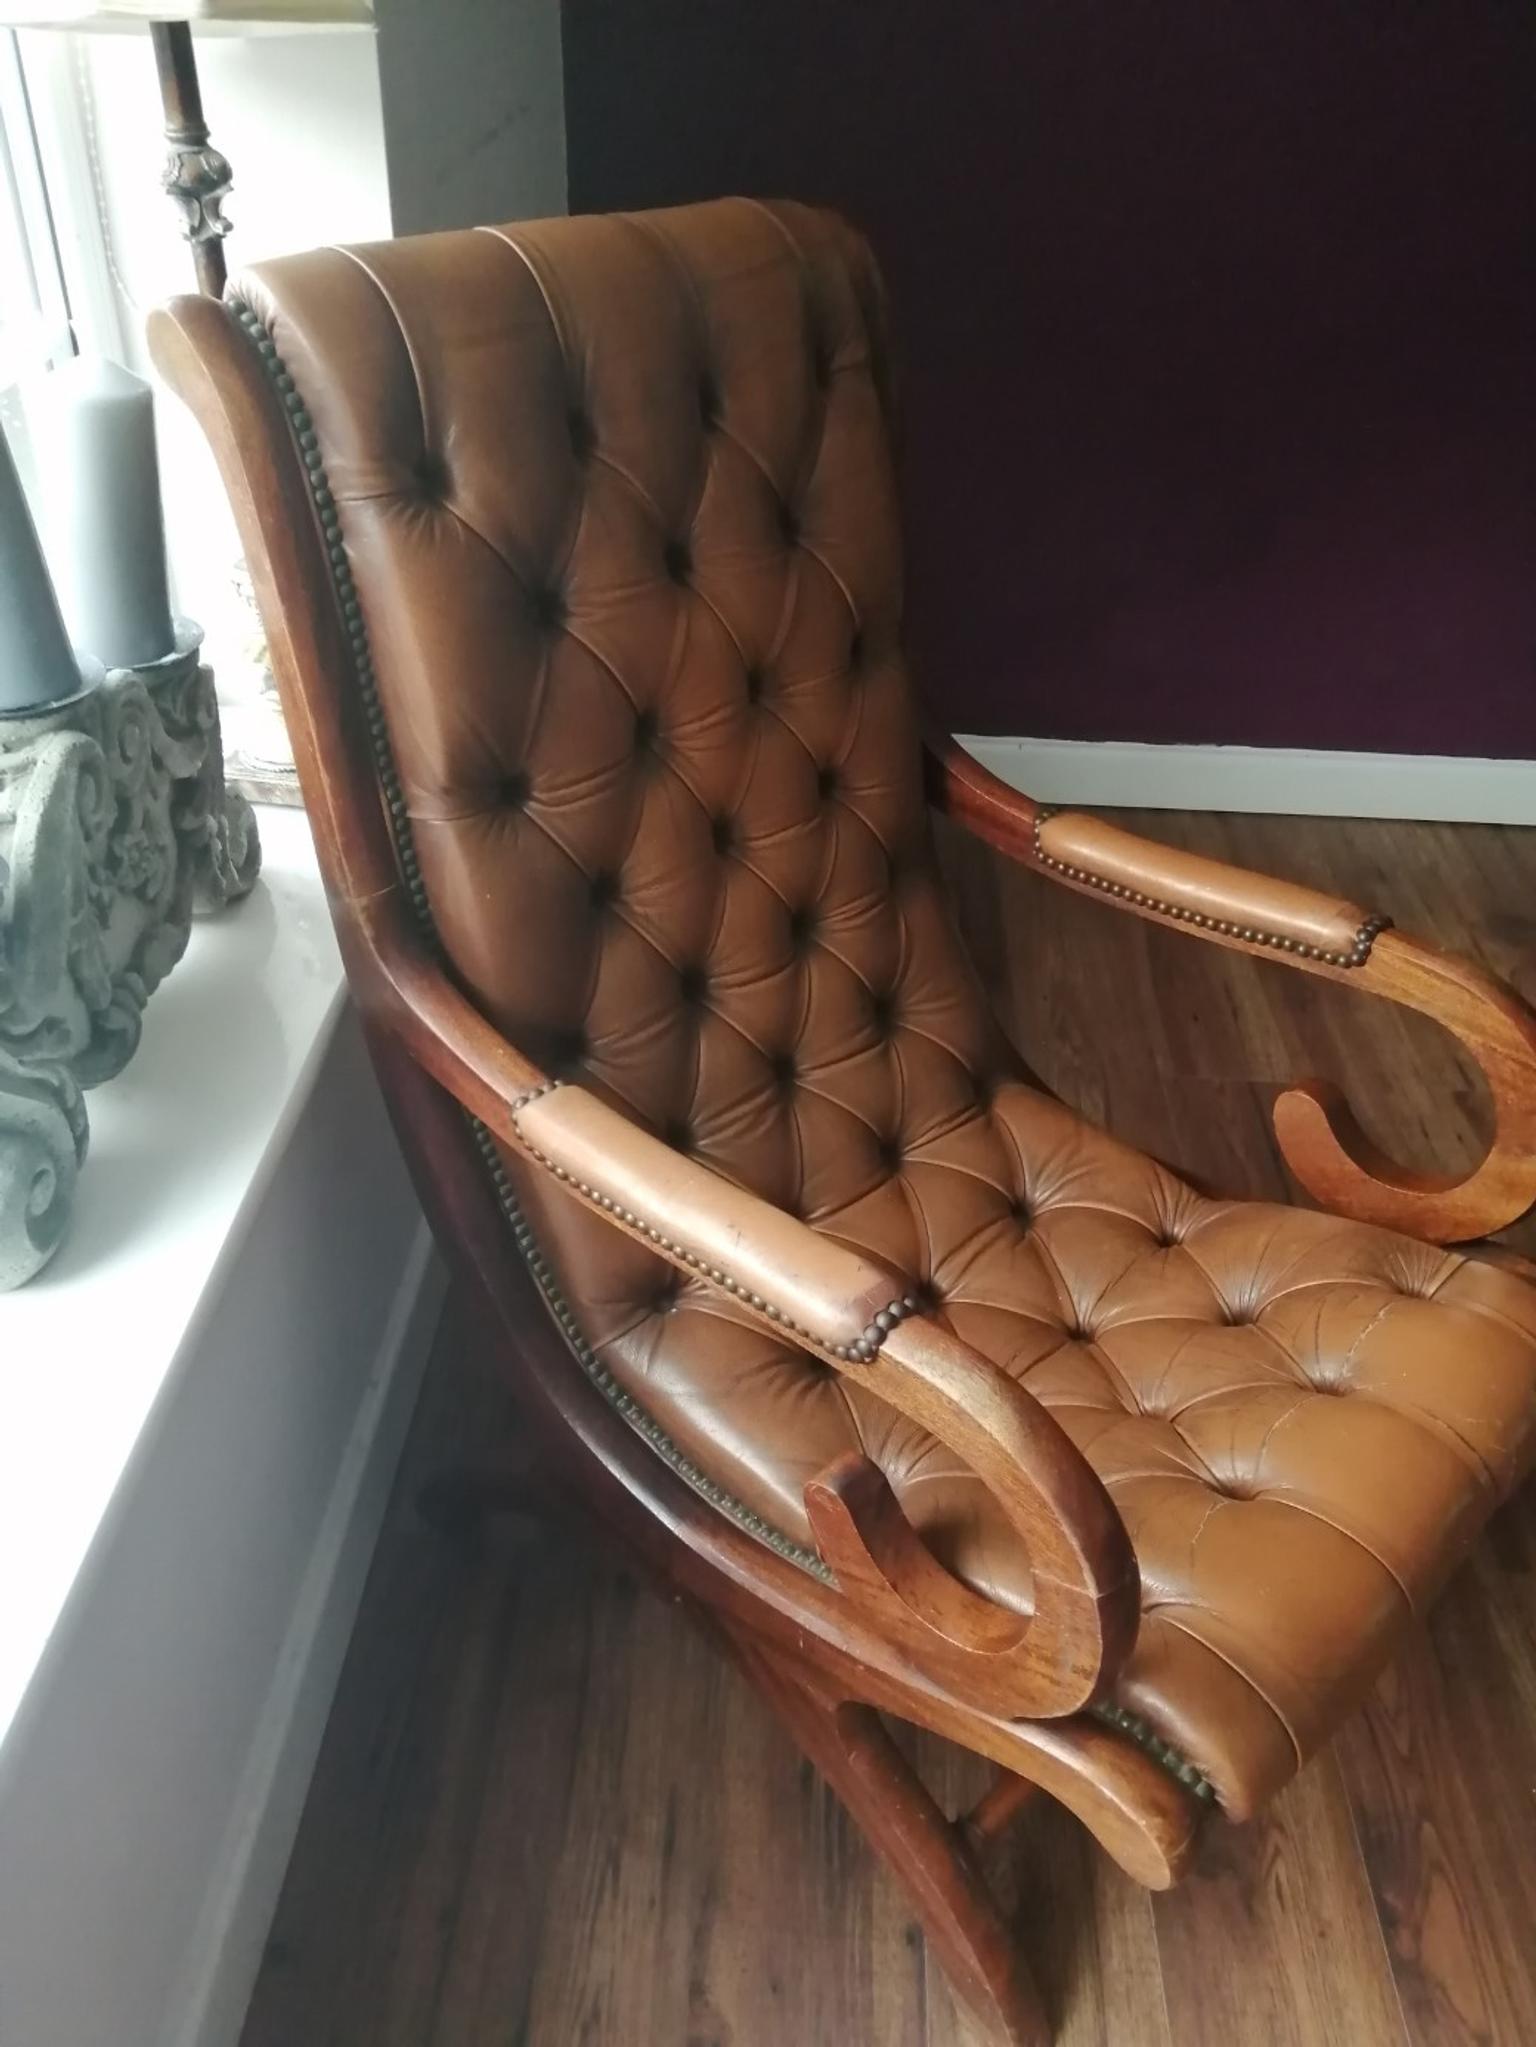 Antique Leather Slipper Chair In Ch42 Wirral For 140 00 For Sale